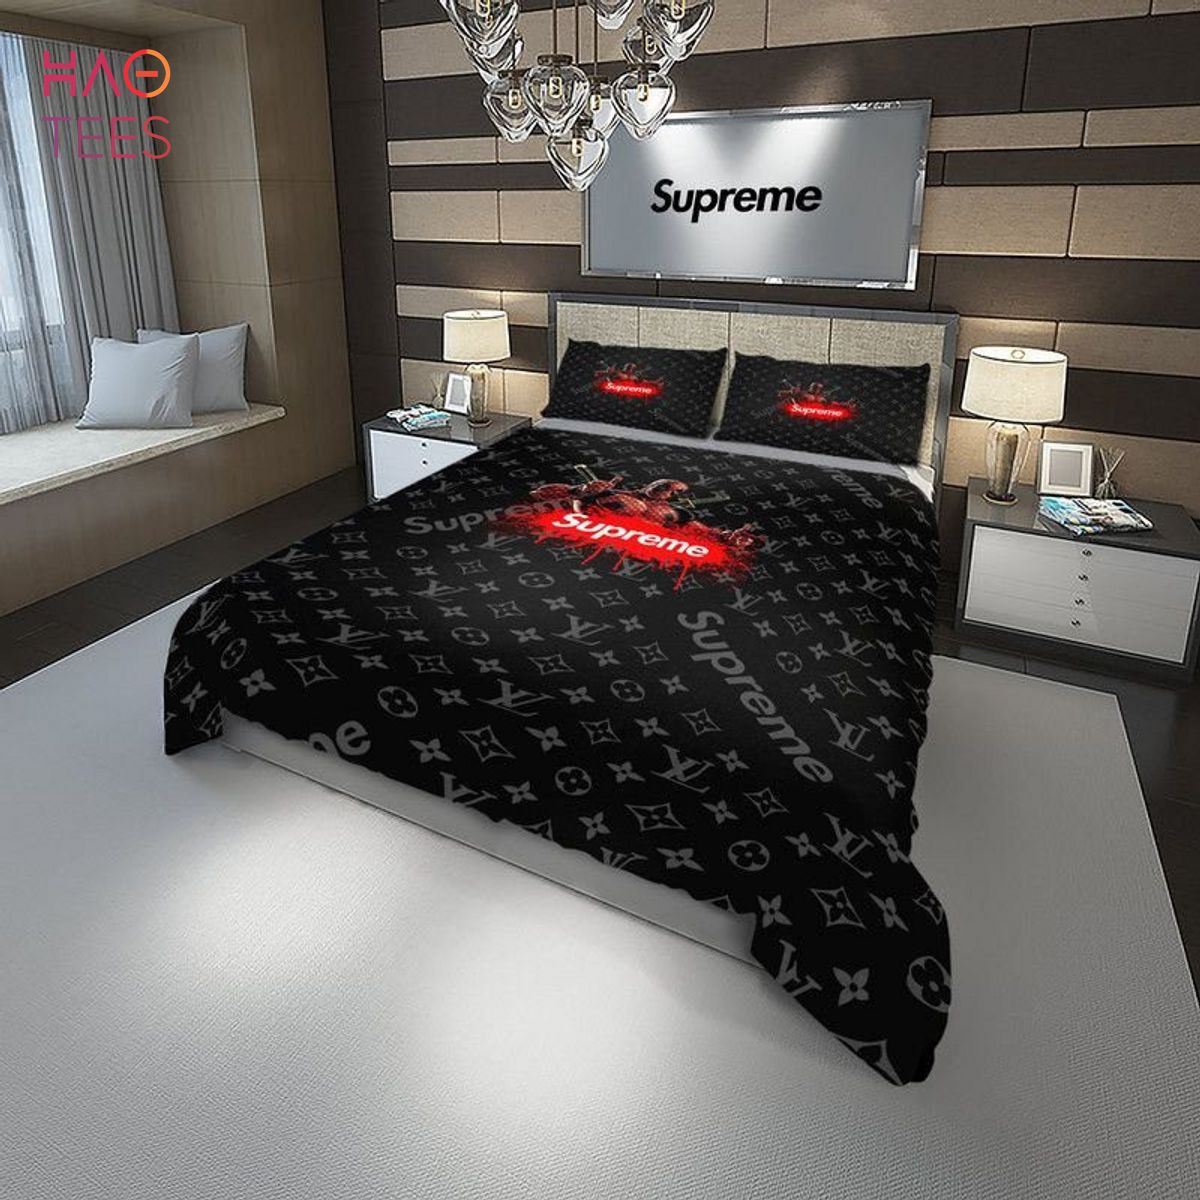 [TRENDDING] Spider Man Inspired 3D Personalized Customized Bedding Sets